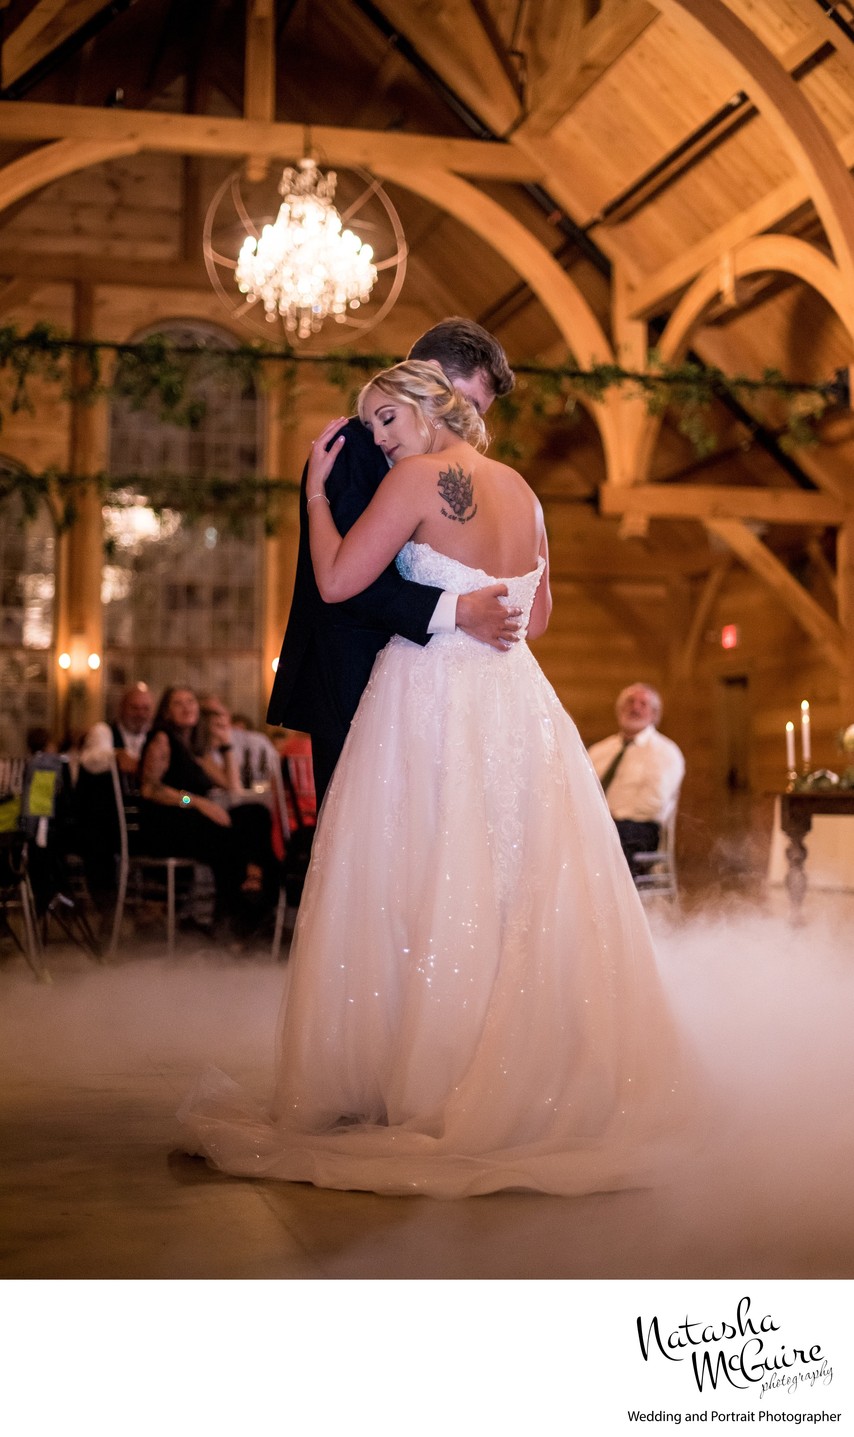 Romantic first dance photo St Charles MO